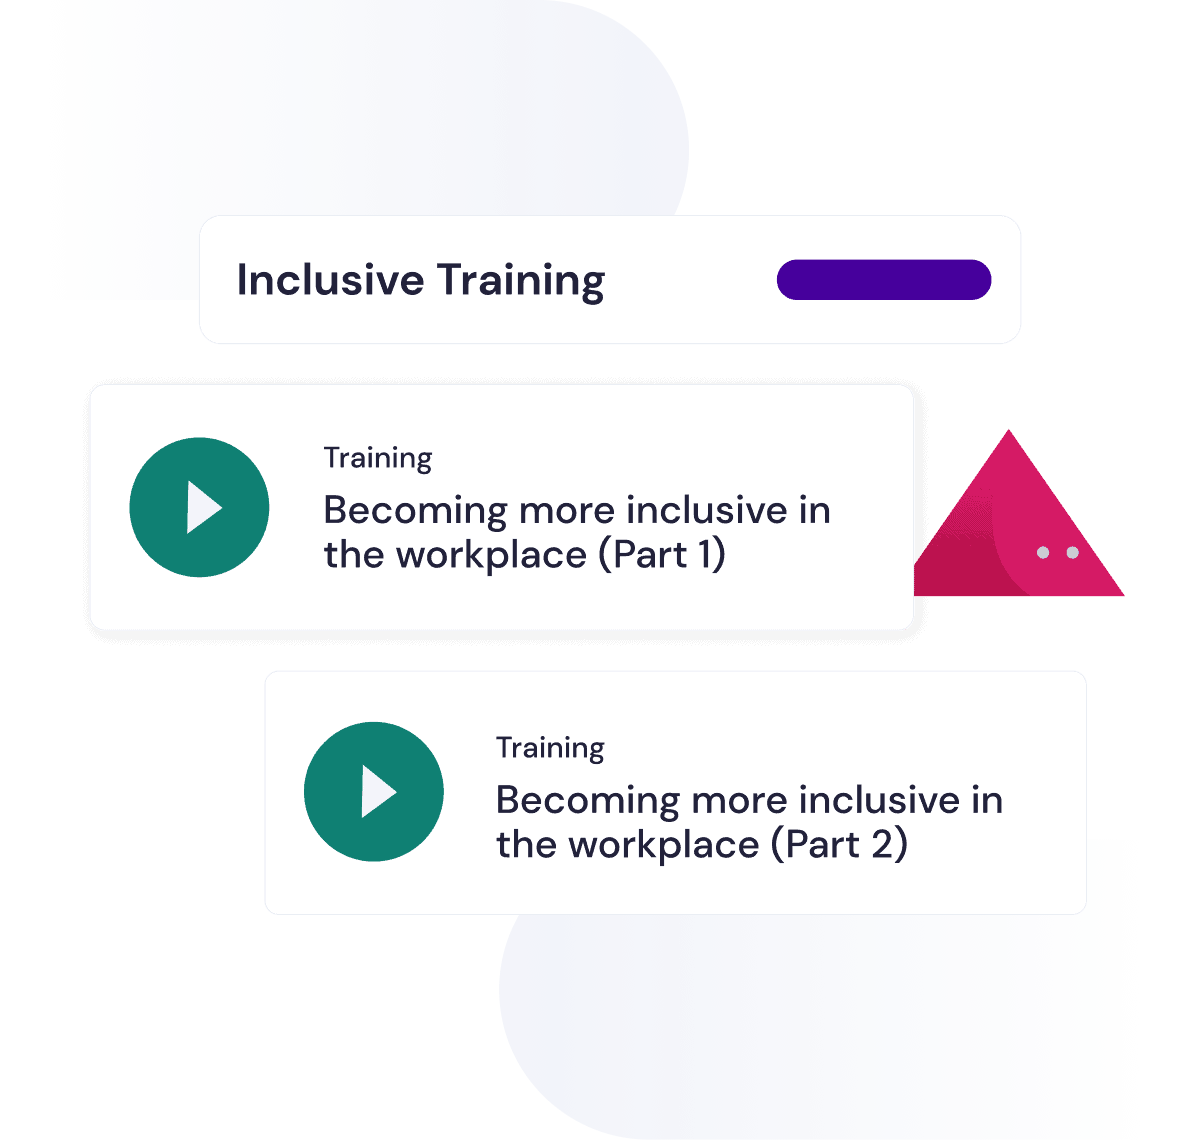 Illustration showing inclusive training sessions for employees